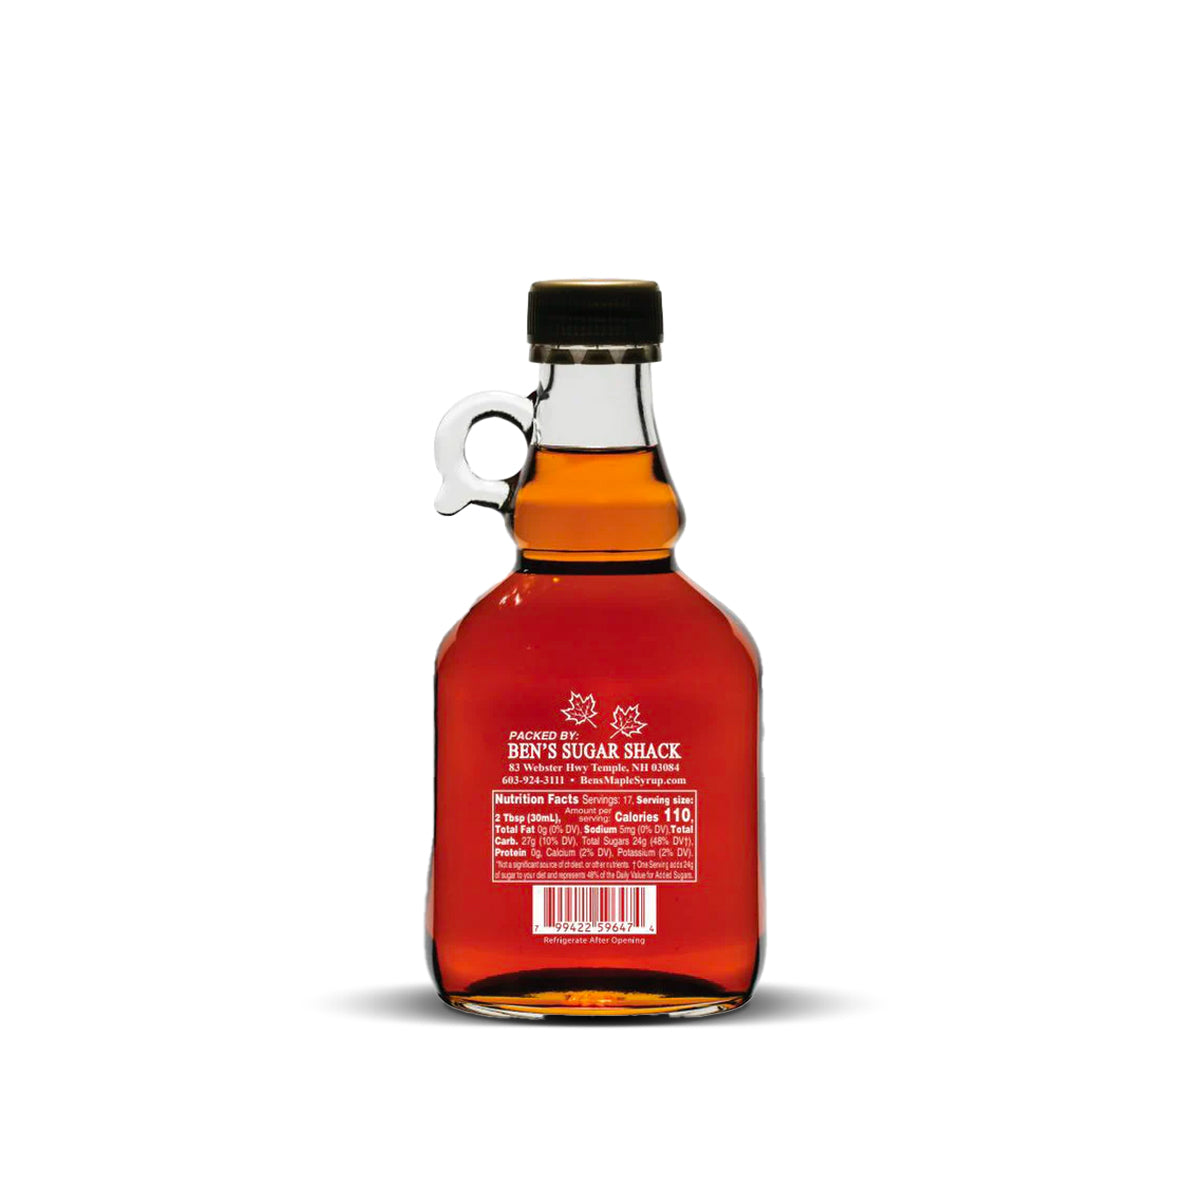 Pure Maple Syrup in New England Glass Jug - 16.9 oz